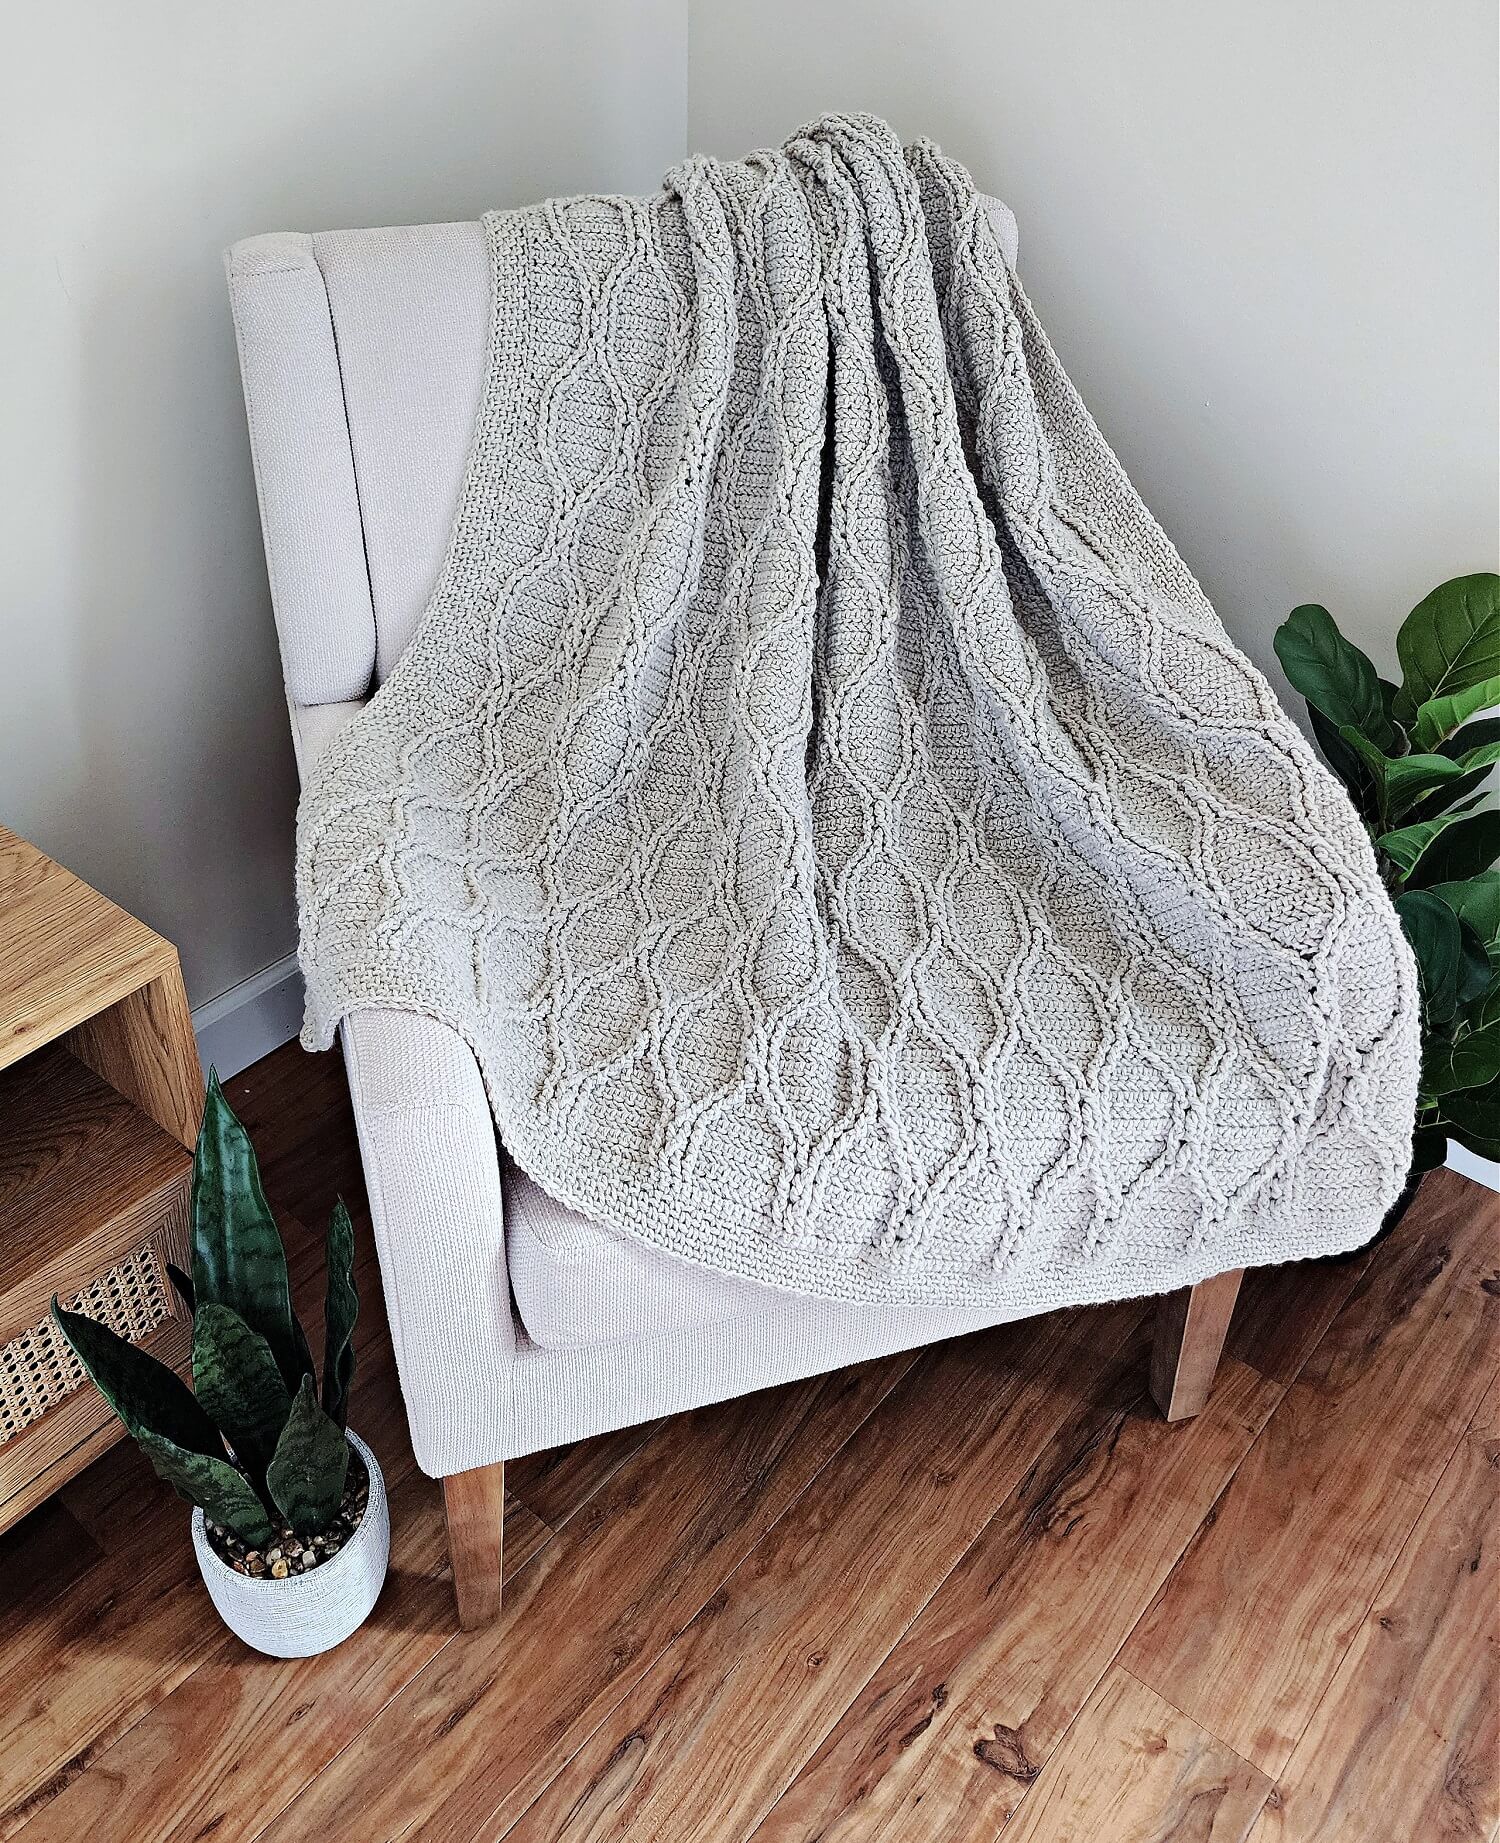 Image of Crochet Kit - Marseille Cabled Blanket